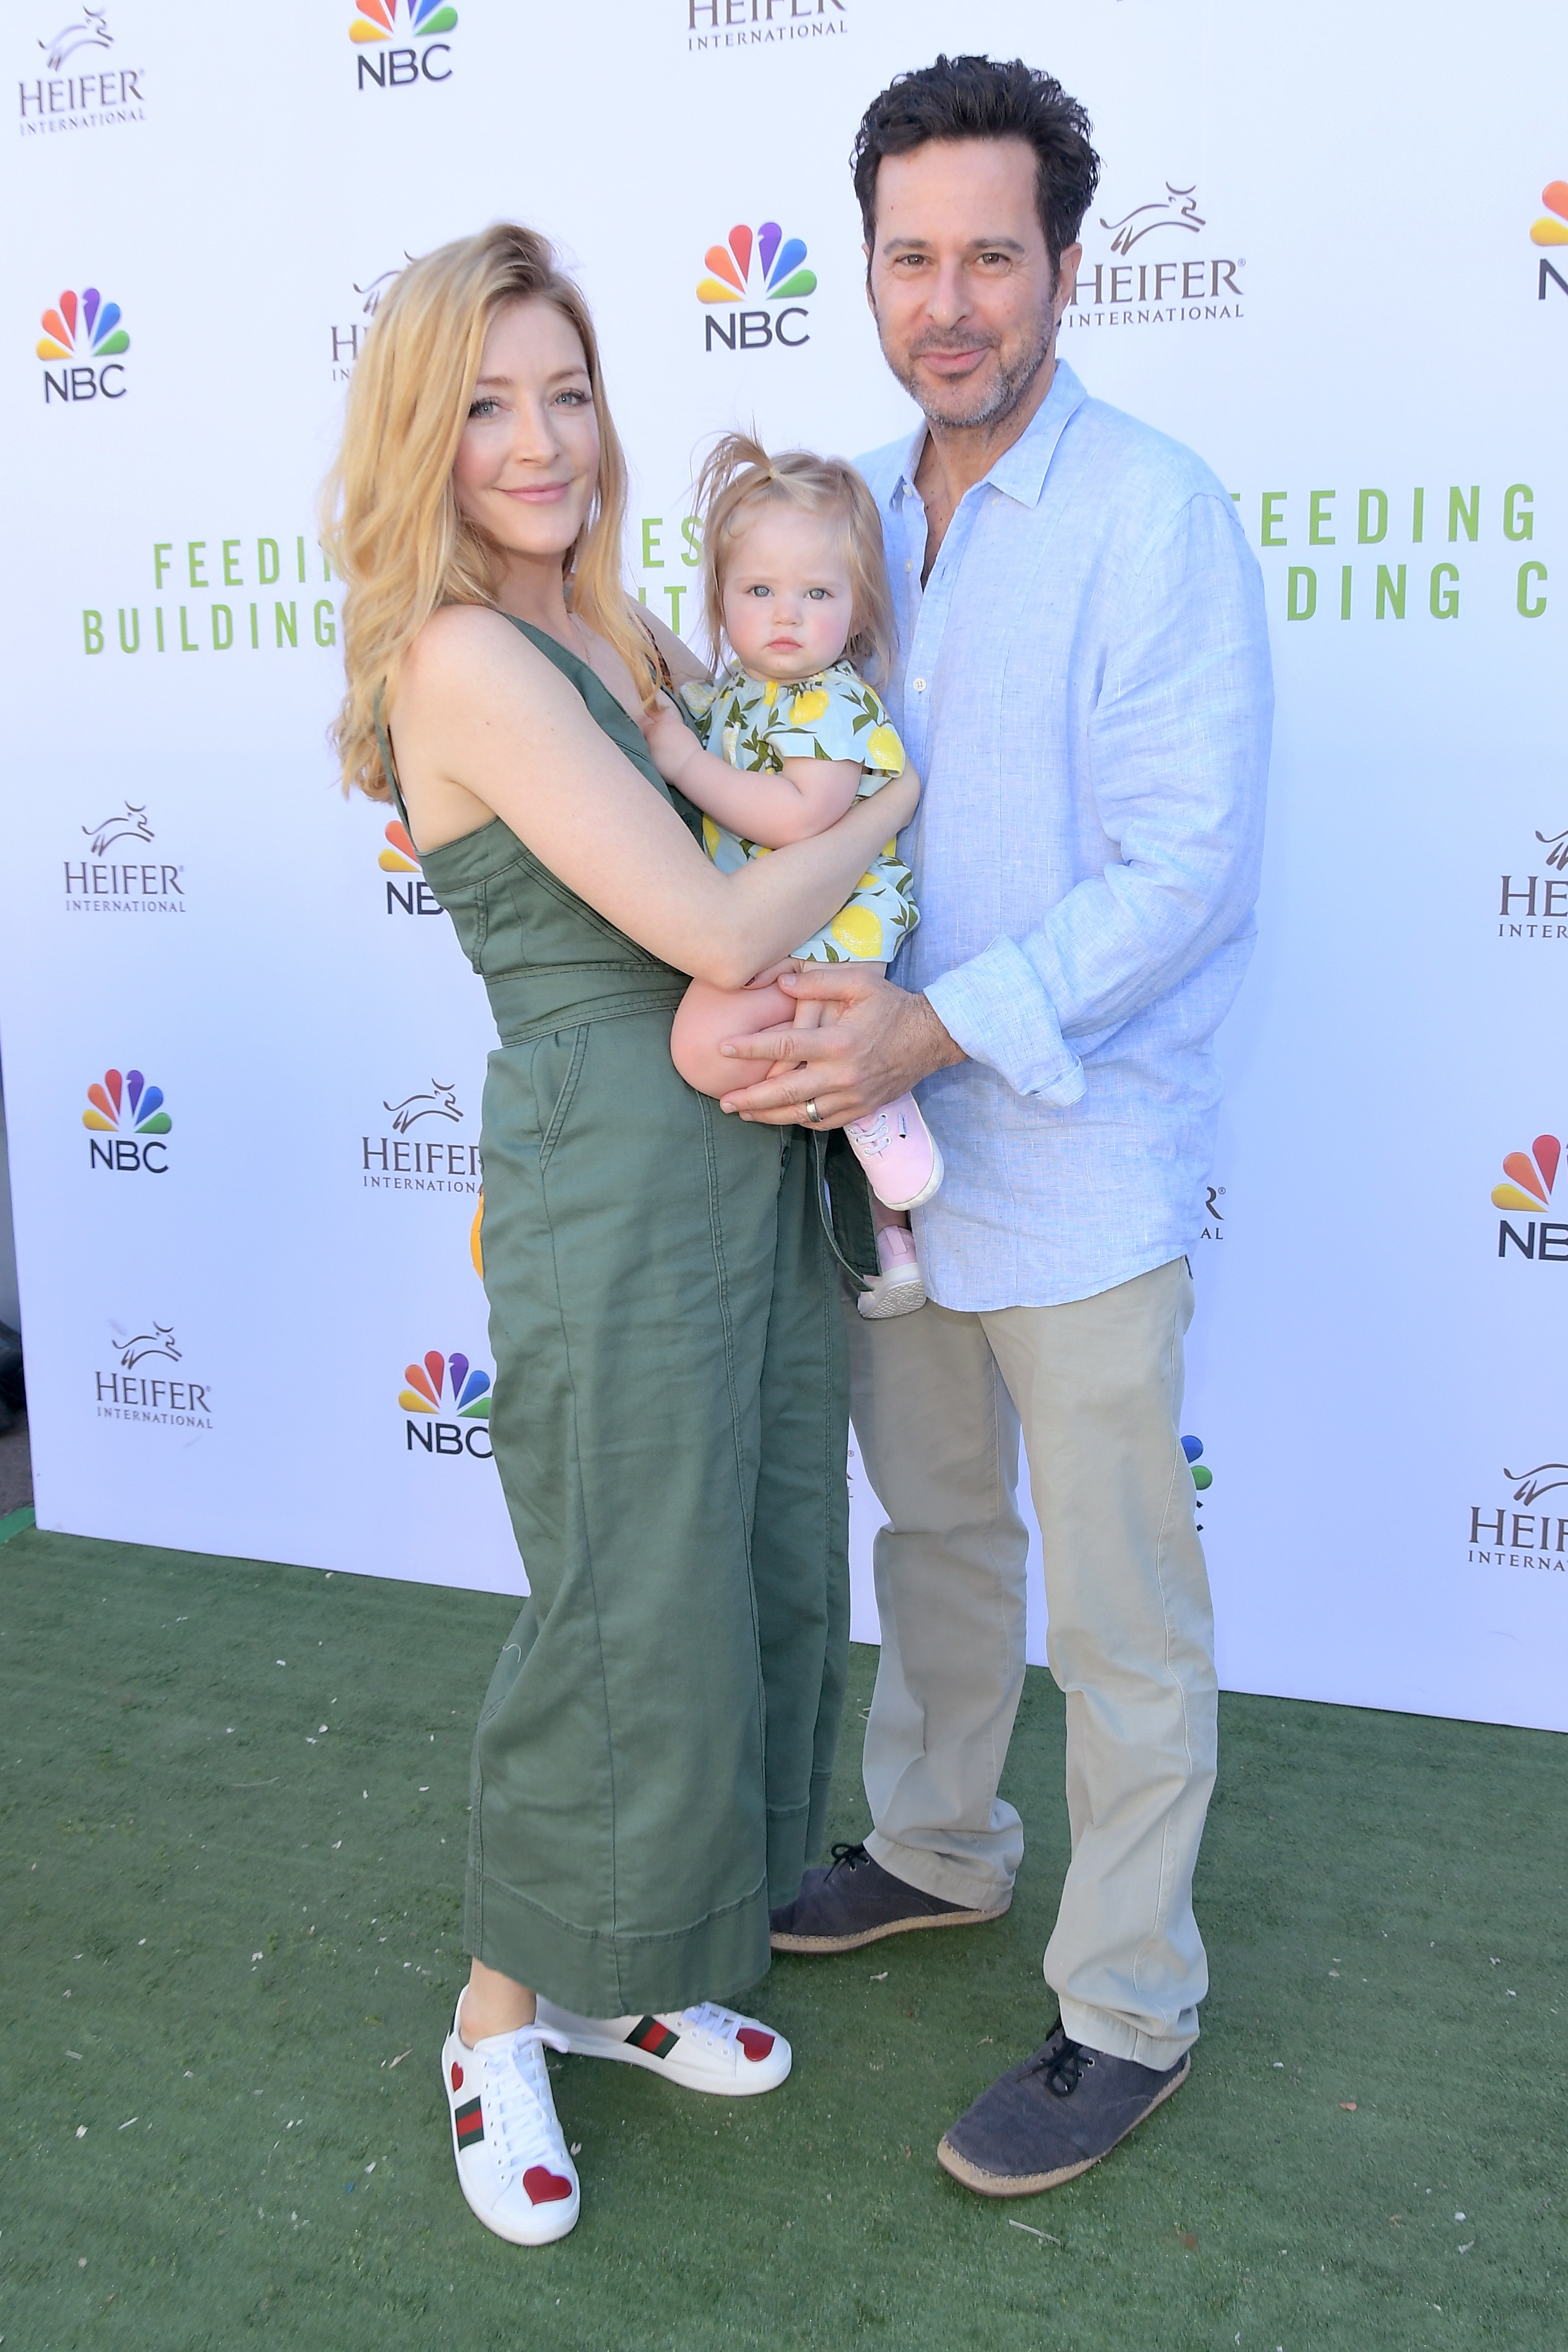 they&#x27;re dressed casually with their baby at an NBC event